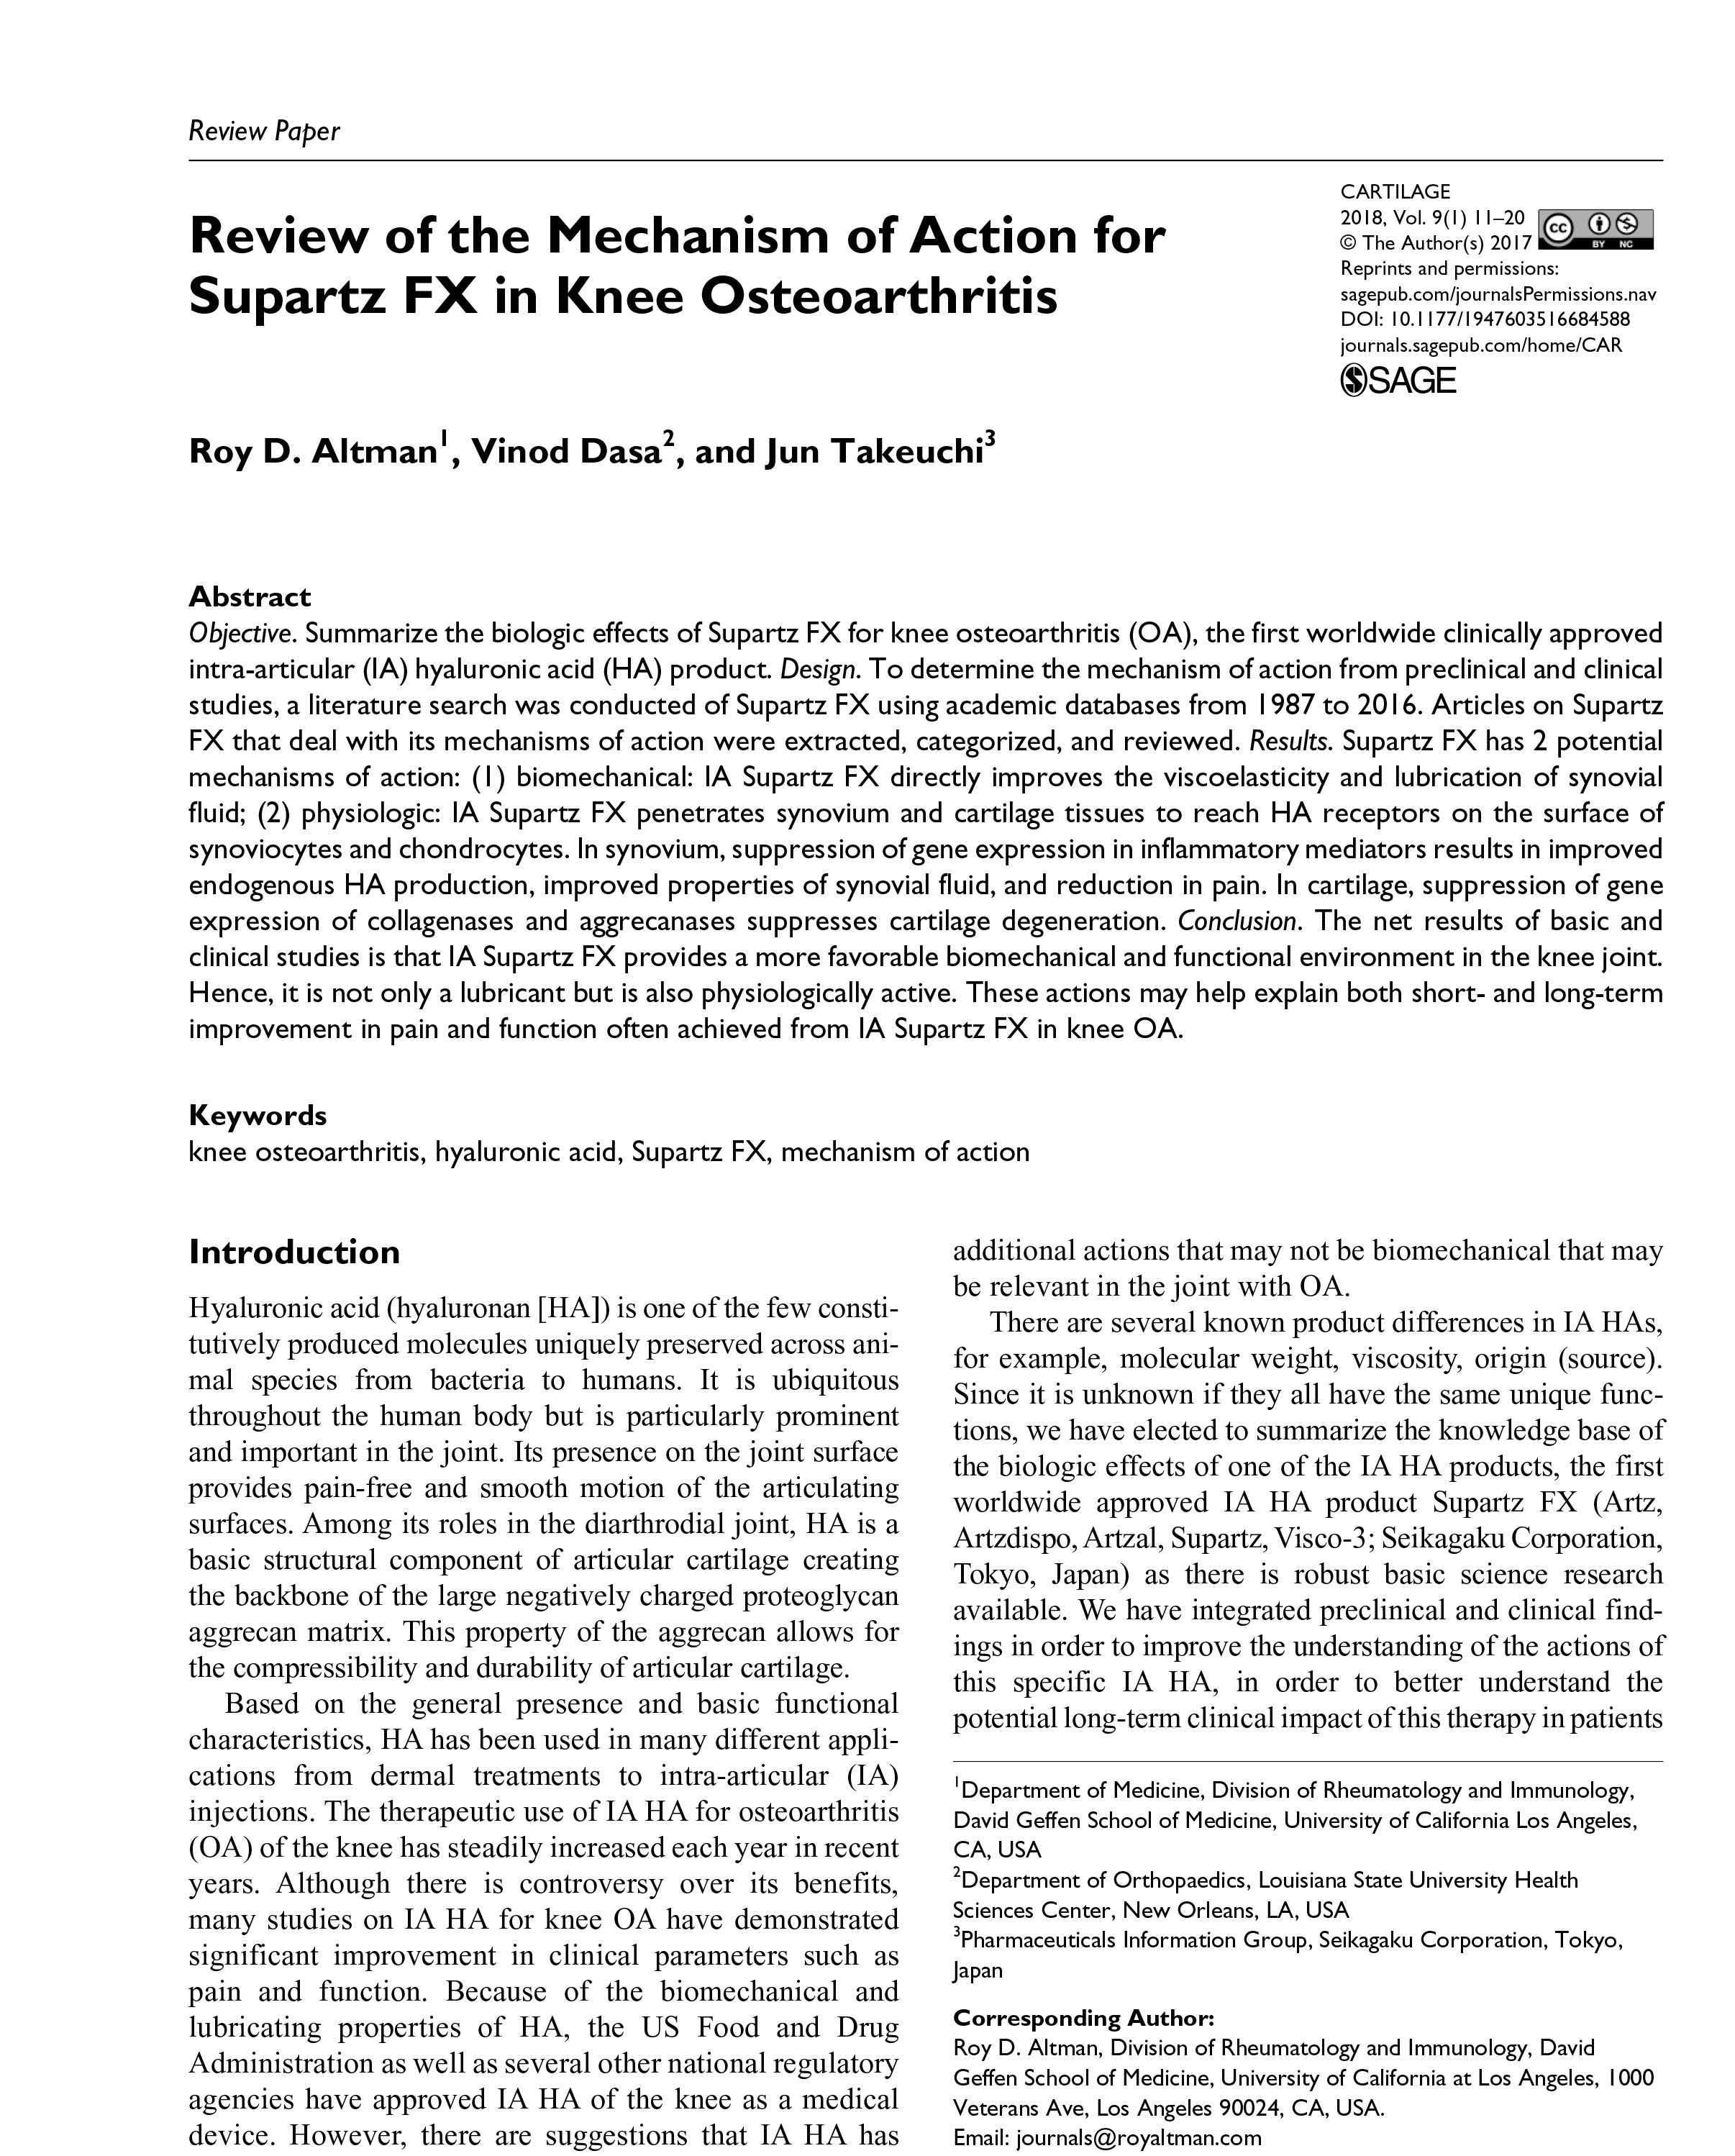 Review-of-the-Mechanism-of-Action-for-Supartz-FX-in-Knee-Osteoarthritis-1.jpg